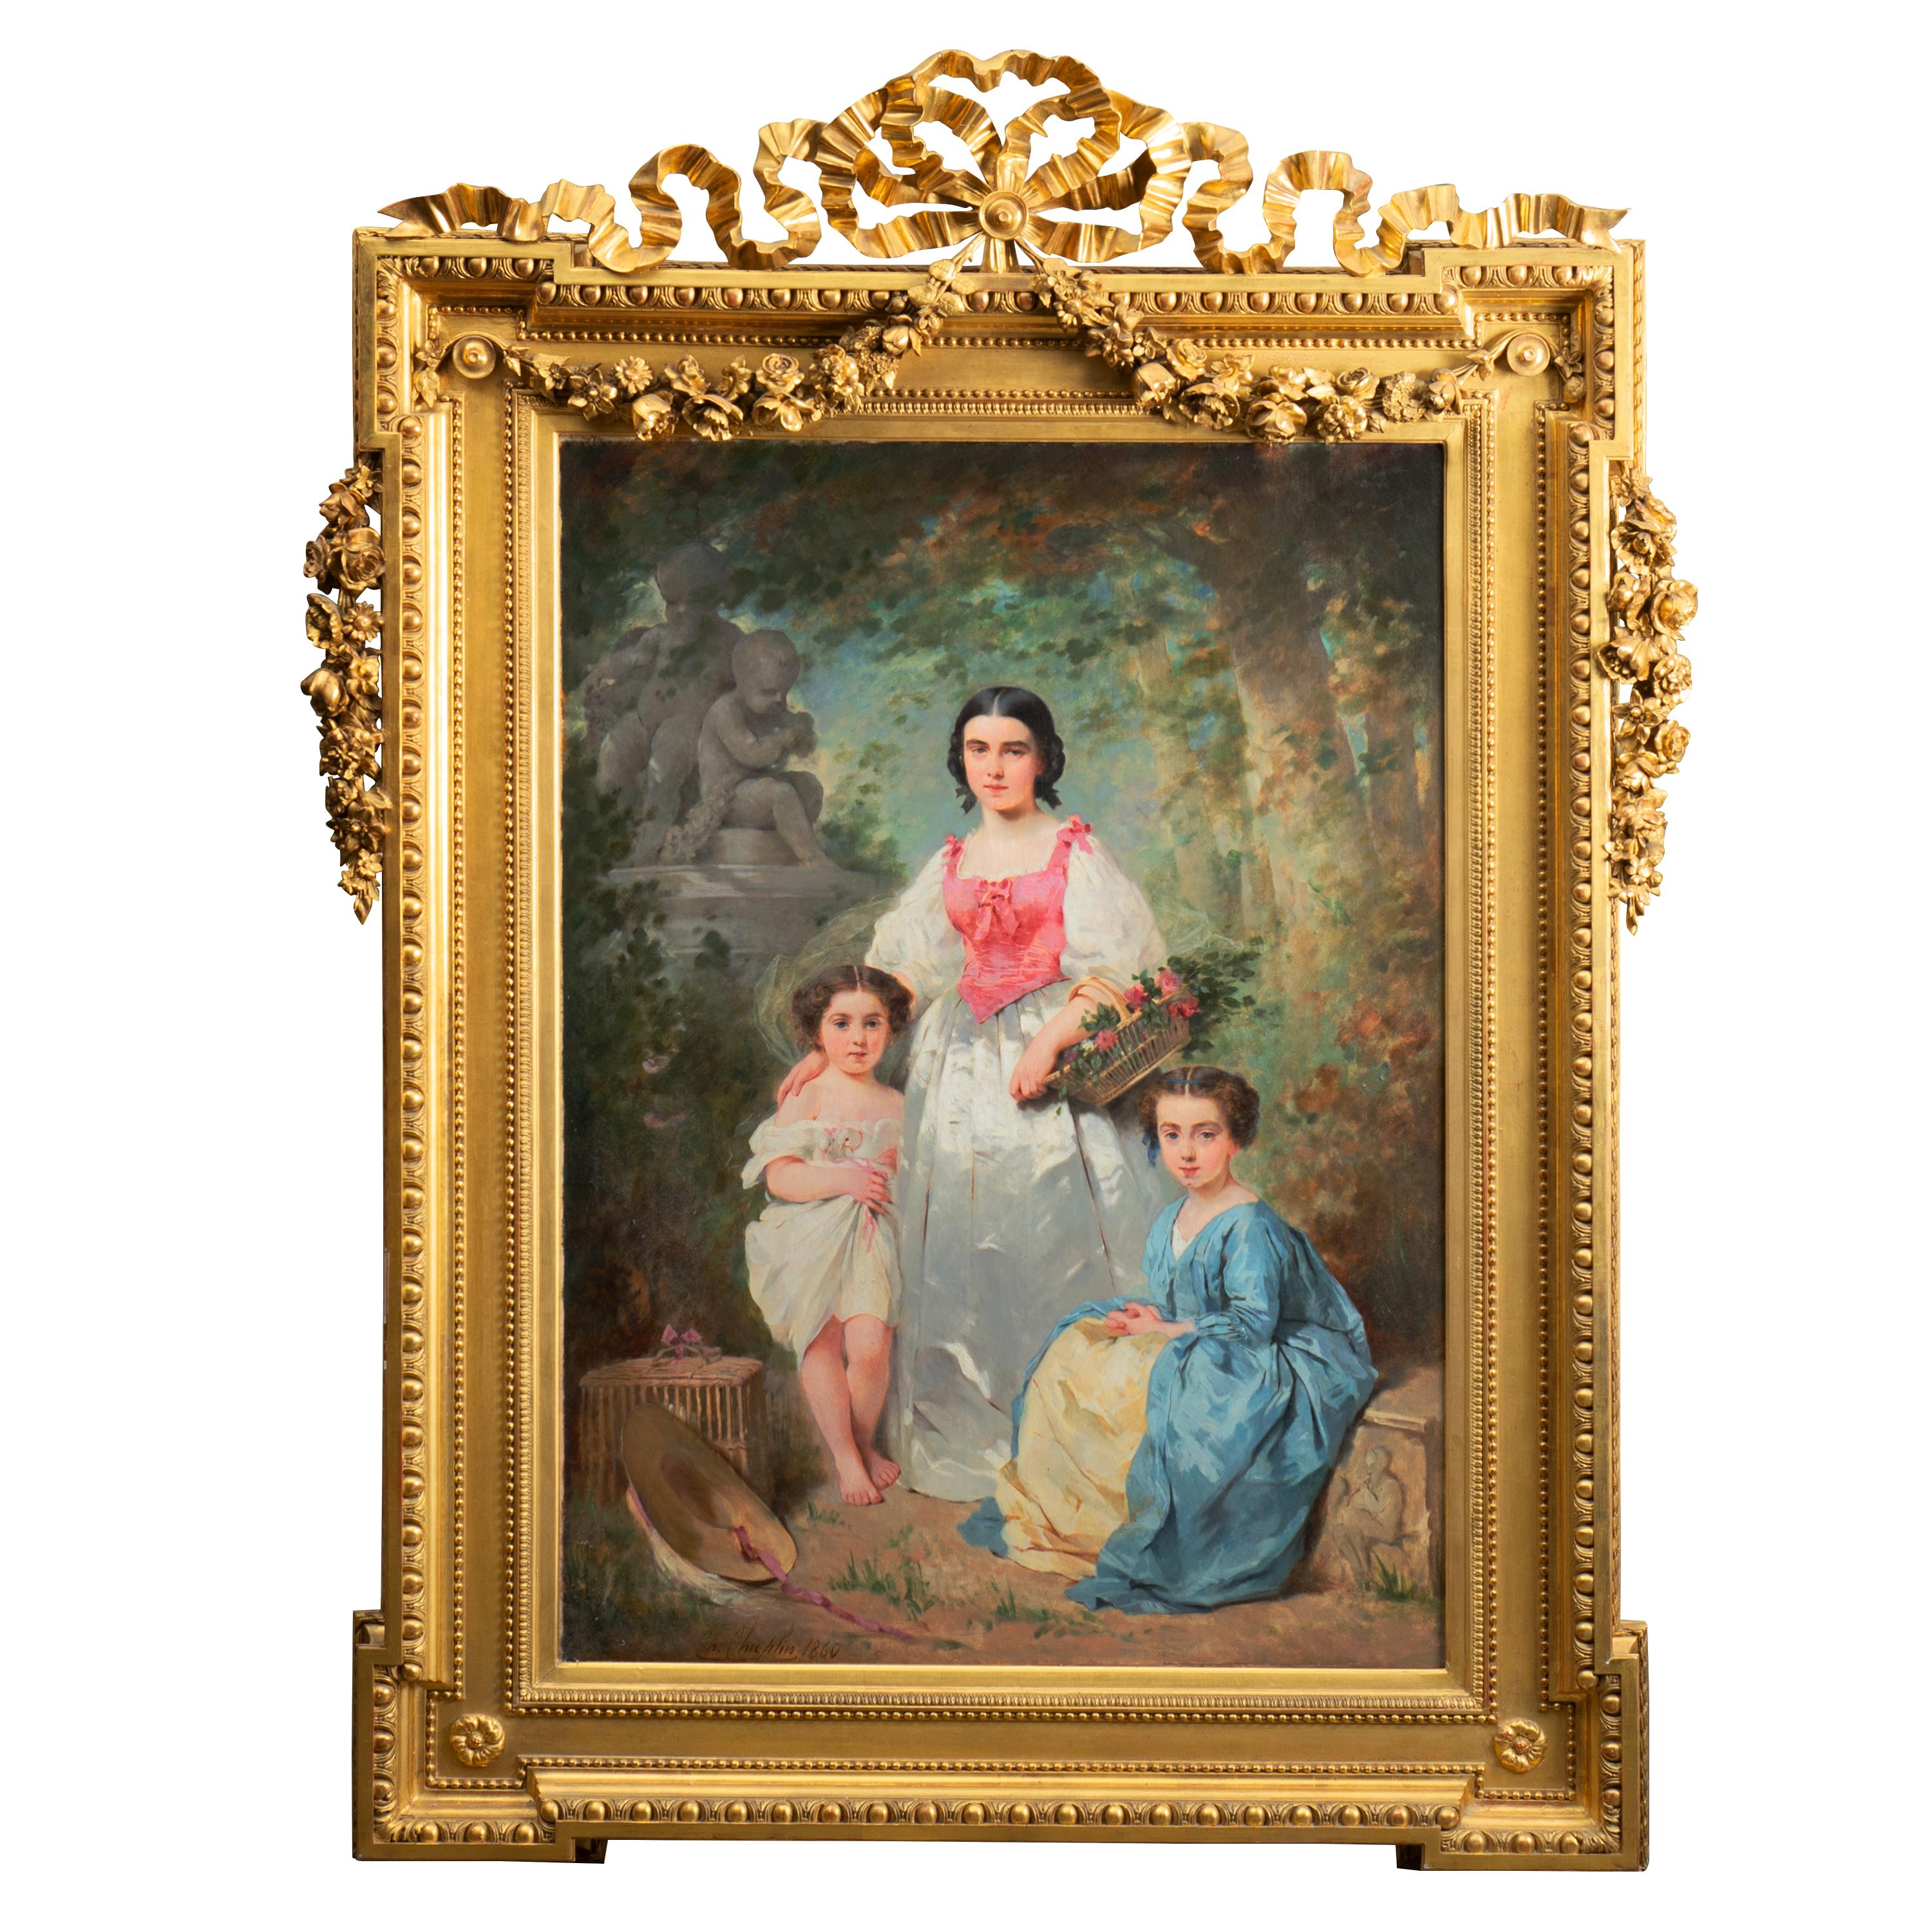 Charles Chaplin (French, 1825-1891)
Portrait de la famille Gros, placed in an ornate hand carved gilt wood frame. 
signed and dated 'Ch. Chaplin. 1860' (lower left)
oil on canvas
Dimensions of Canvas 51